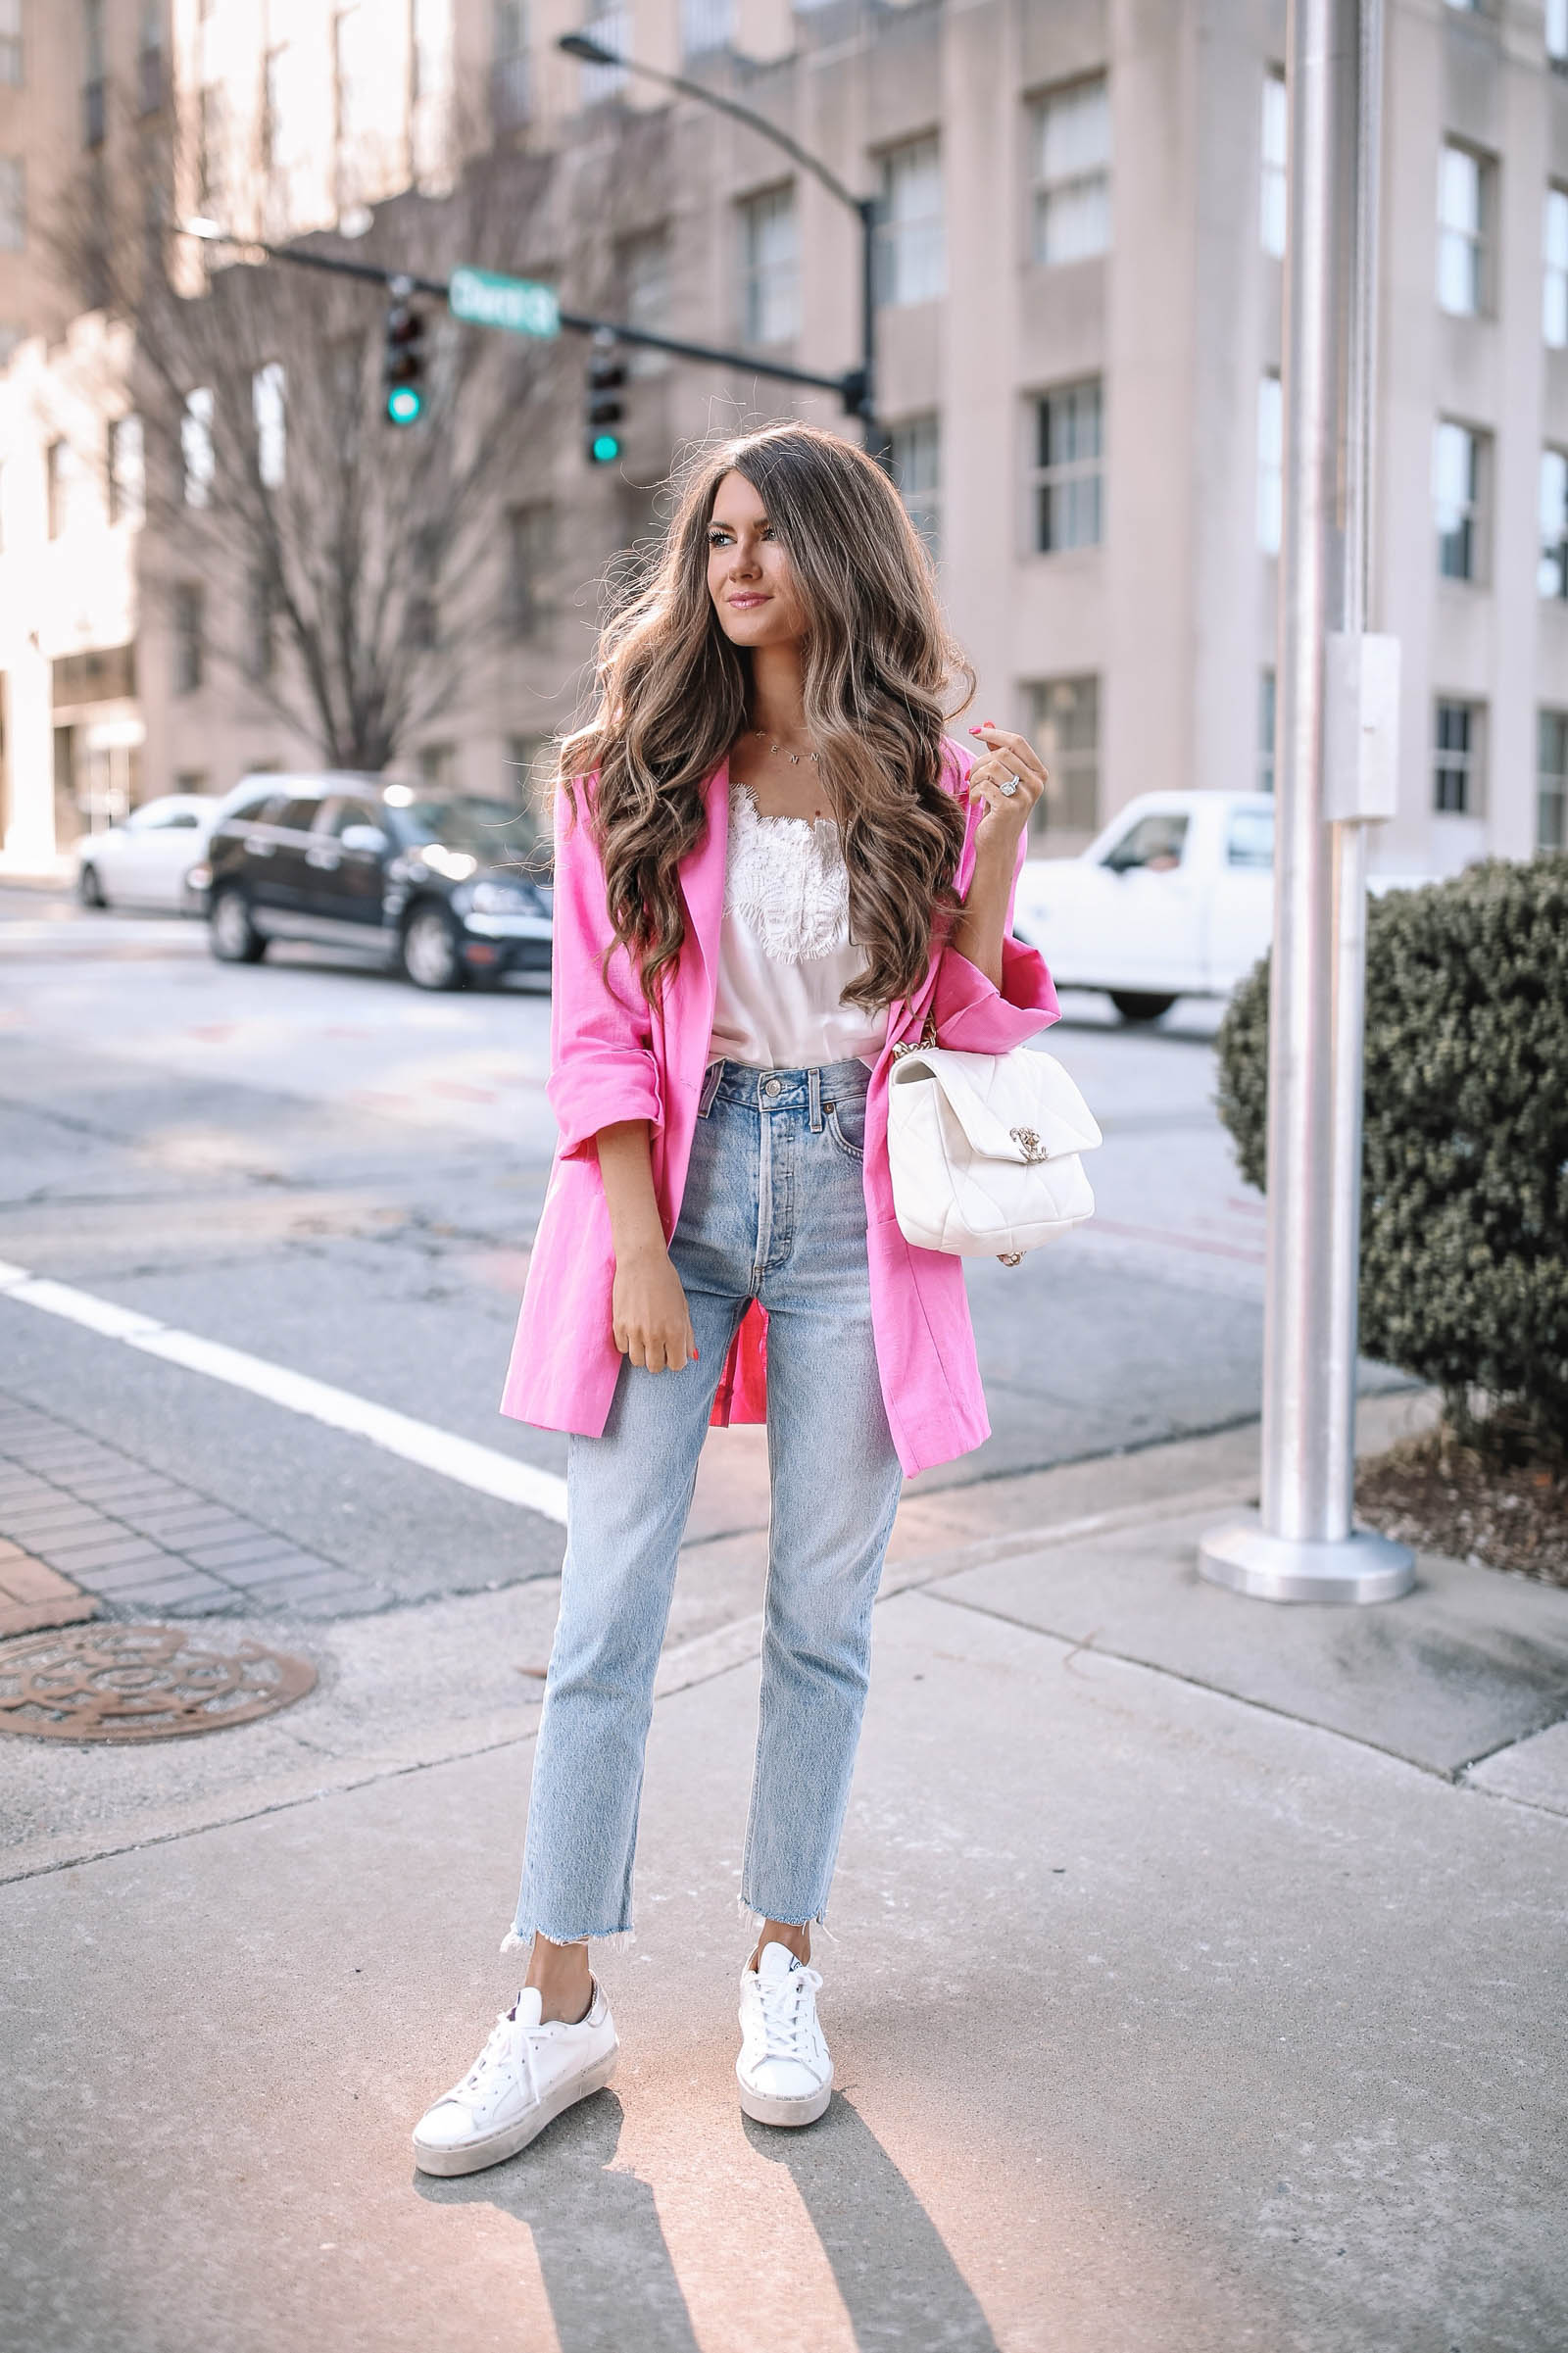 https://www.southerncurlsandpearls.com/wp-content/uploads/2022/03/pink-blazer-outfit-streetstyle-spring-fashion-3.jpg